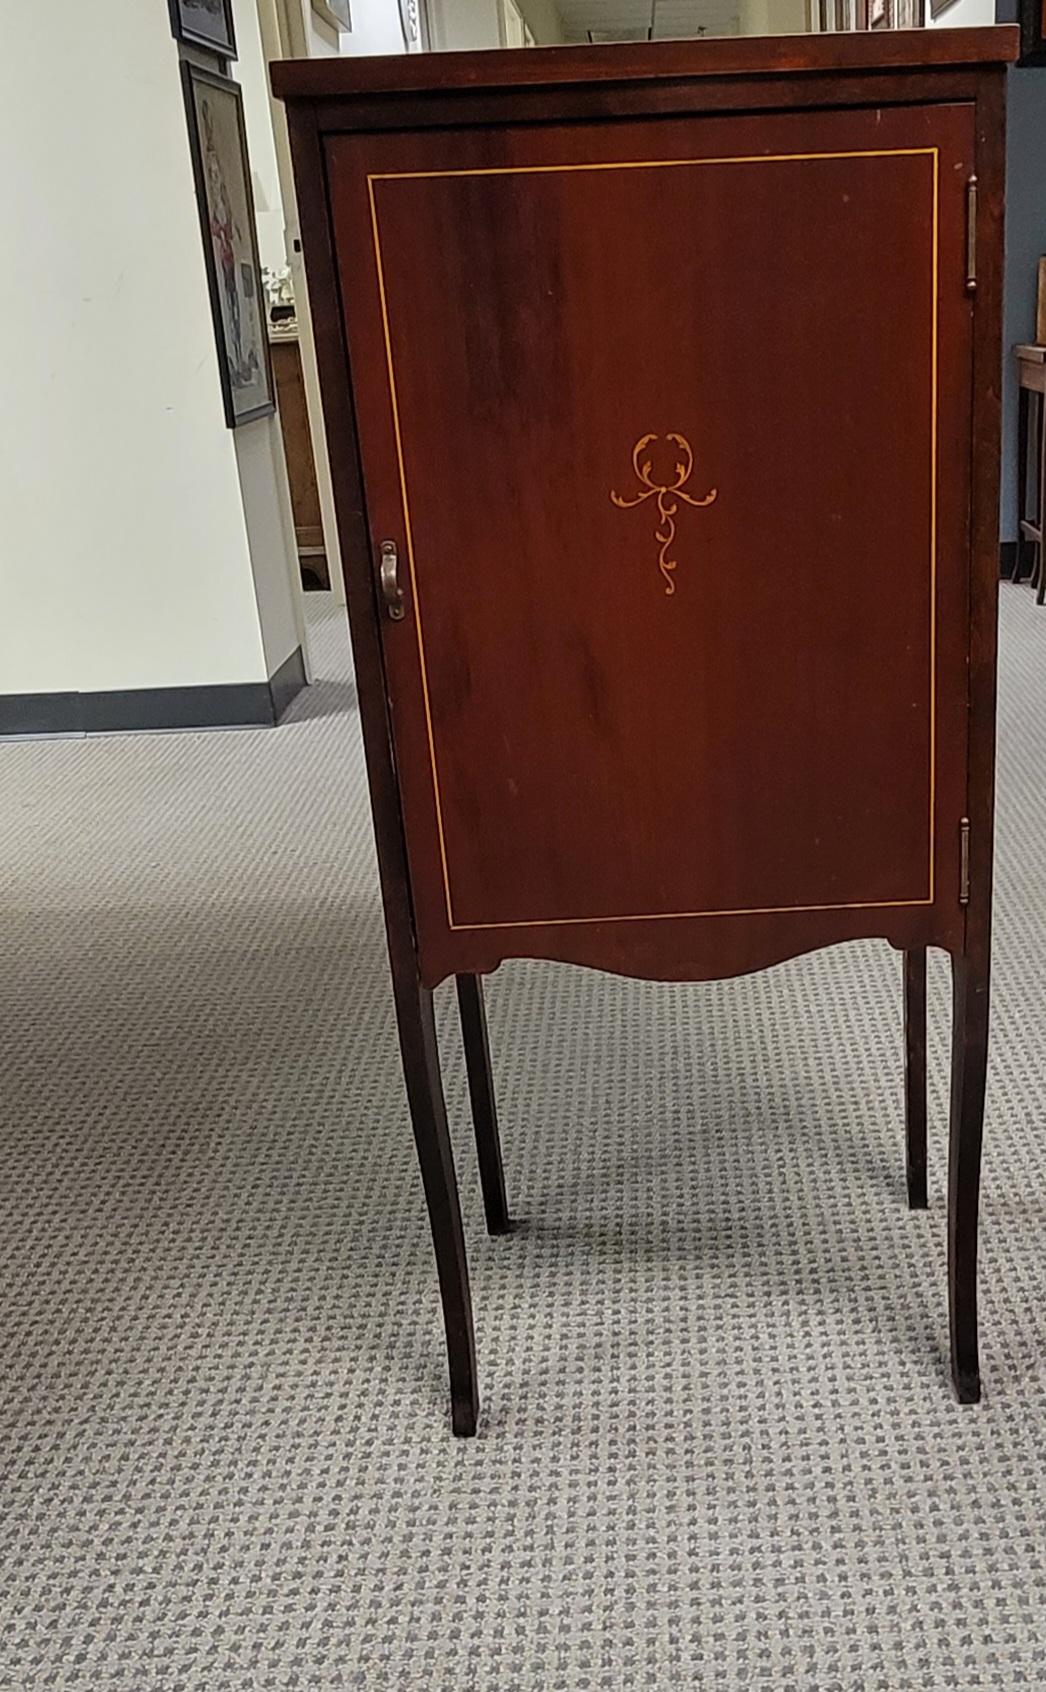 An Early 20th C. Edwardian Mahogany Marquetry Satinwood Inlaid Sheet Music Cabinet with fine inlays. 
Features 4 equal shelves compartments with a 5